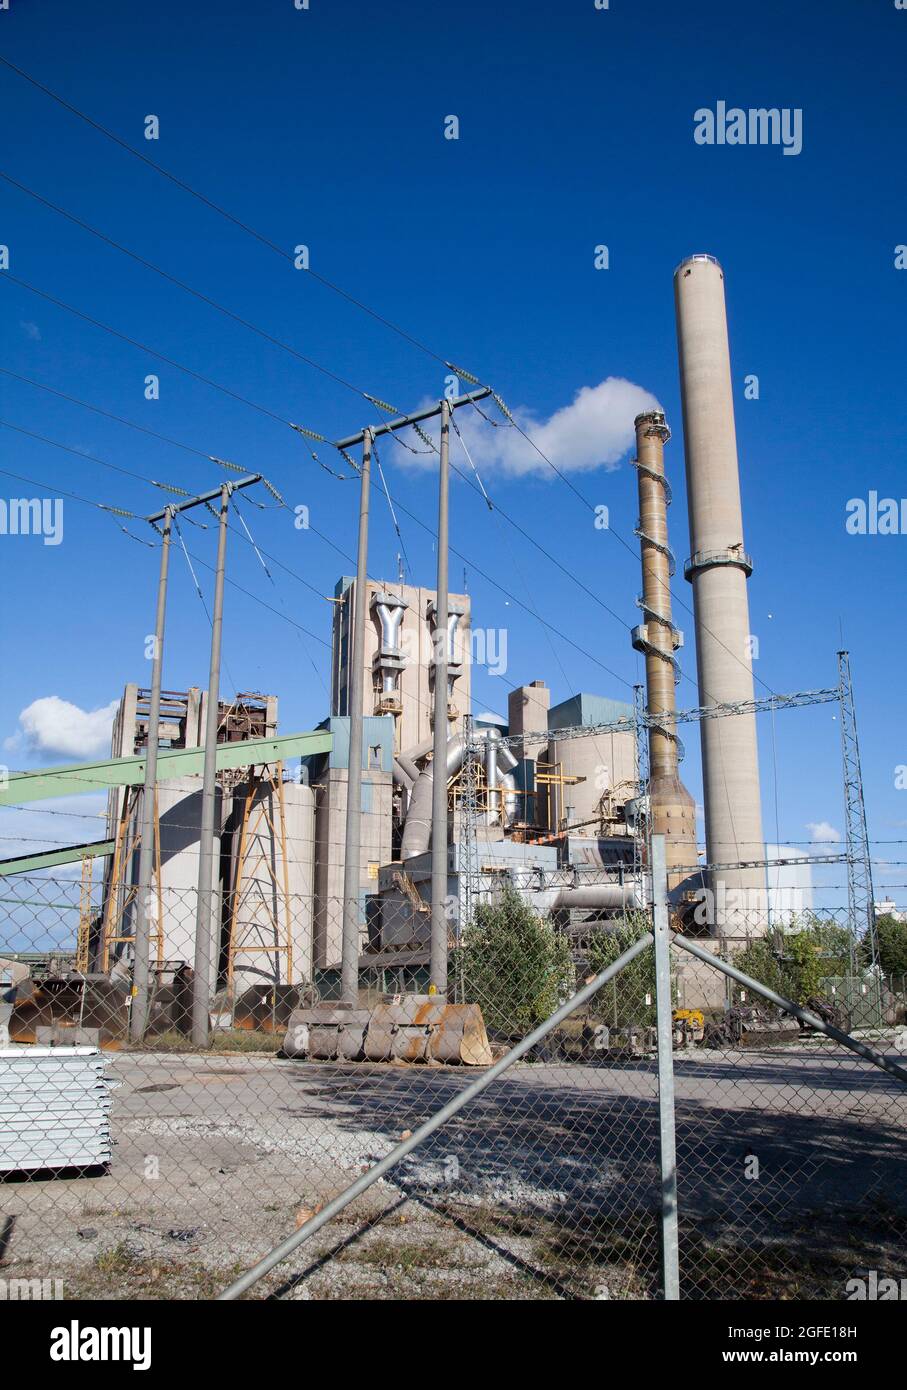 CEMENTA Plant at Slite Gotland produce cement of limestone the plant owns by Heidelberg Industry group and have a large impact on the environment at Gotland Stock Photo